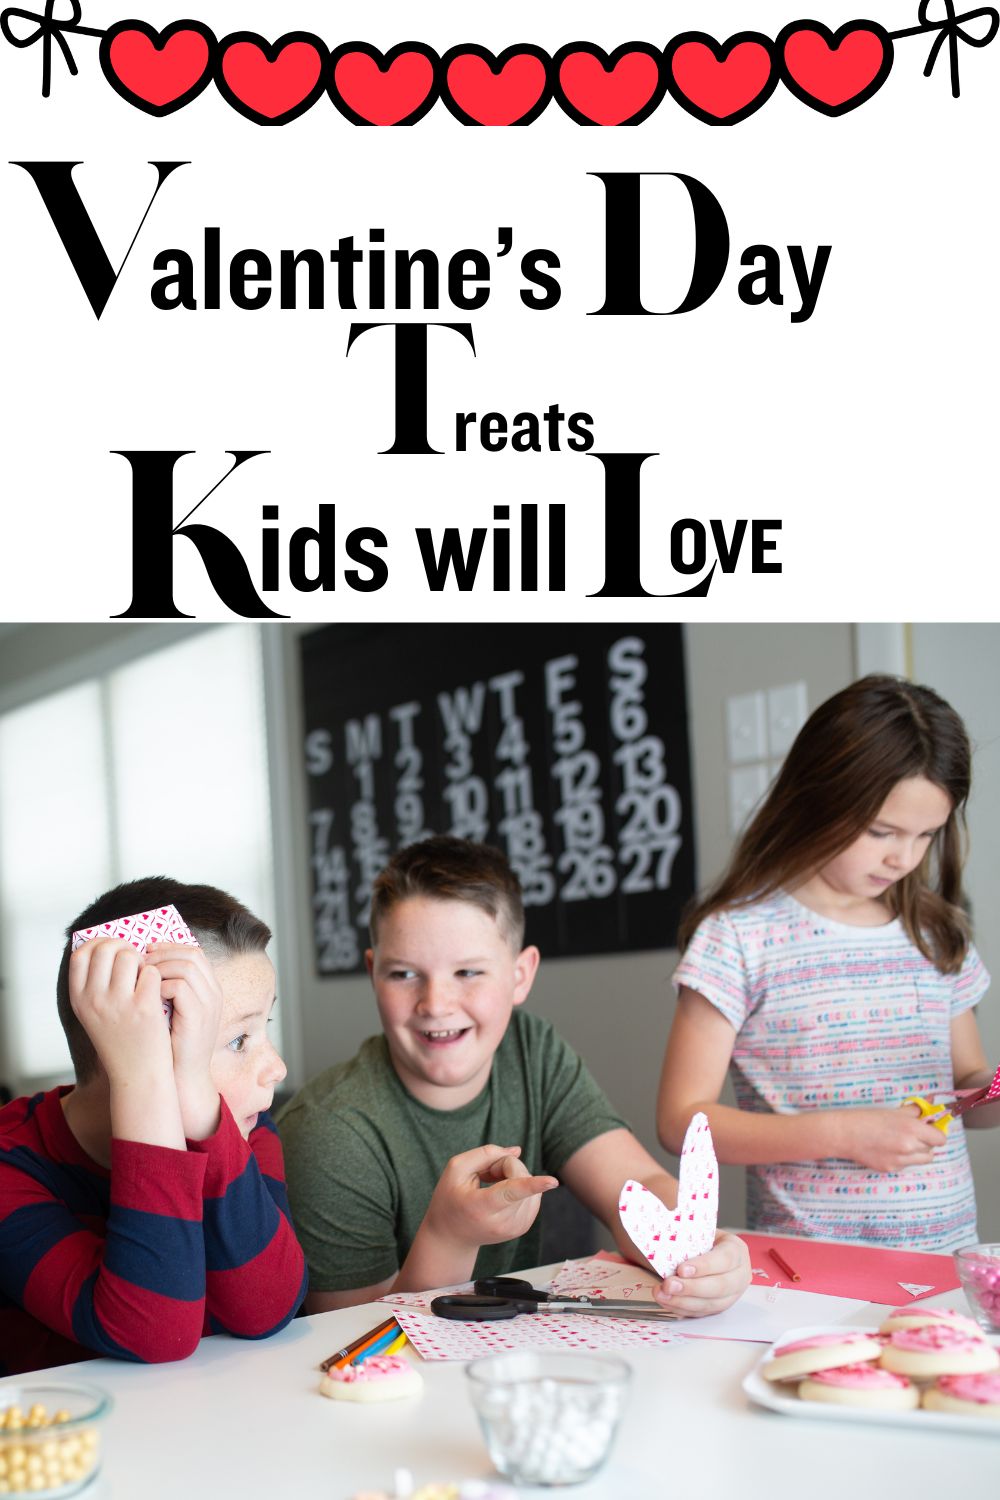 Valentines Day 2019 - Gifts, Cards, Crafts, & Dessert Ideas for V-Day